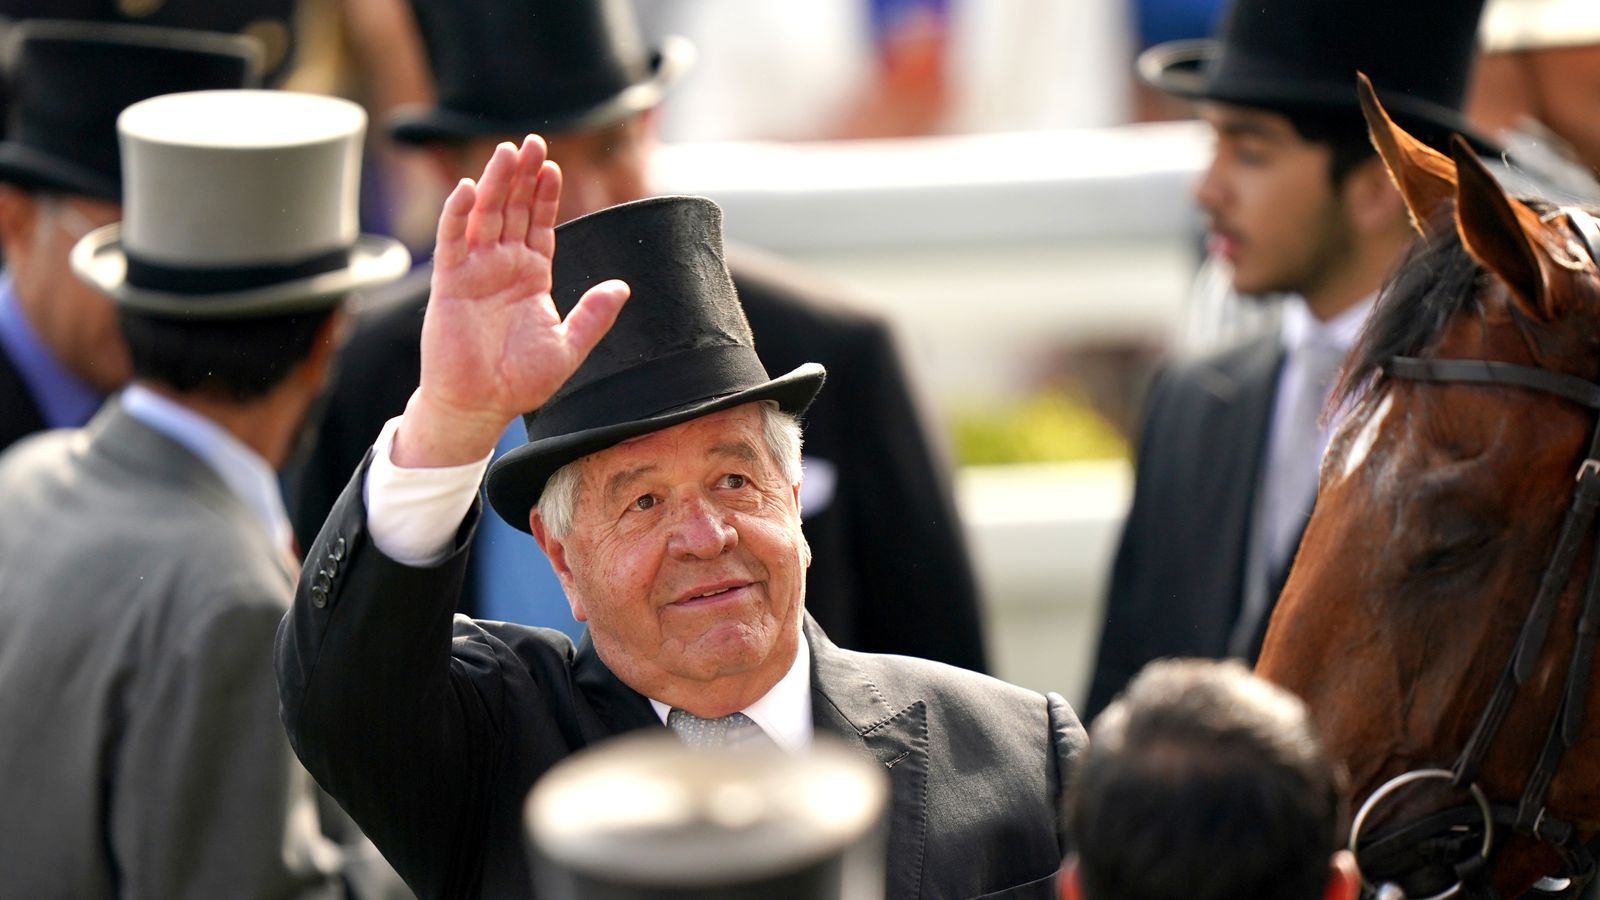 Cazoo Derby: Her Majesty The Queen rang winning trainer Sir Michael Stoute after Desert Crown won at Epsom